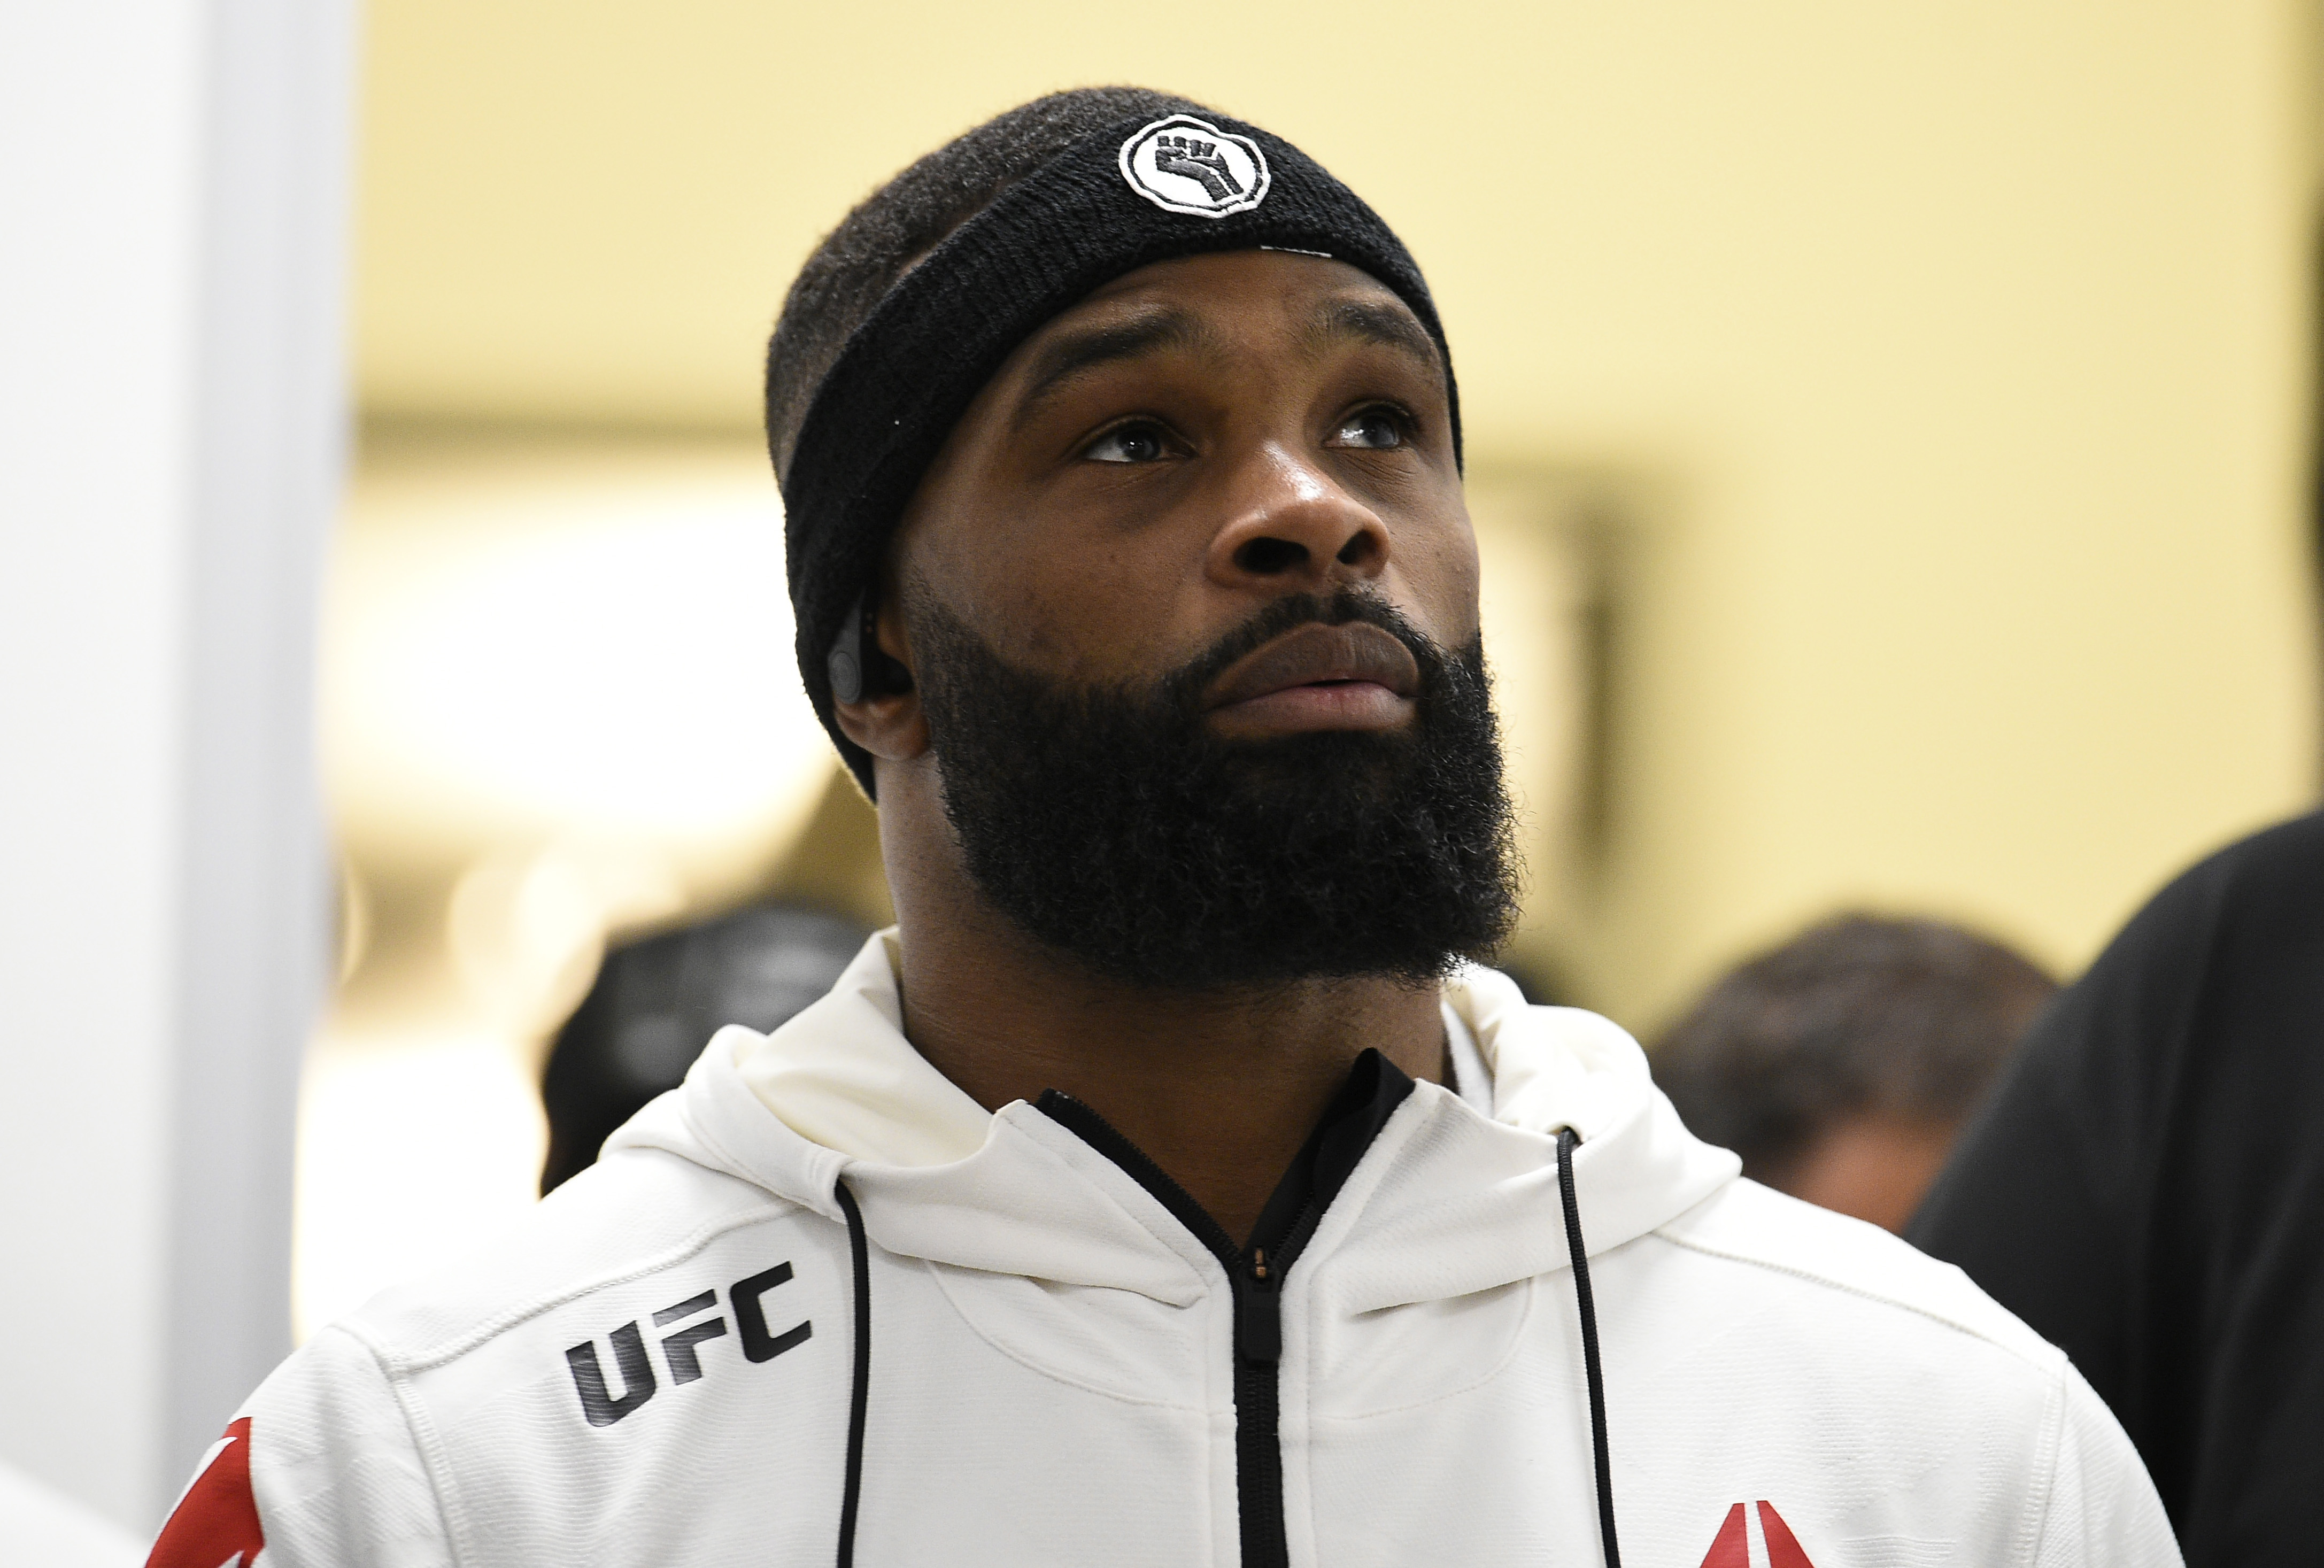 Tyron Woodley looks on before his fight against Colby Covington